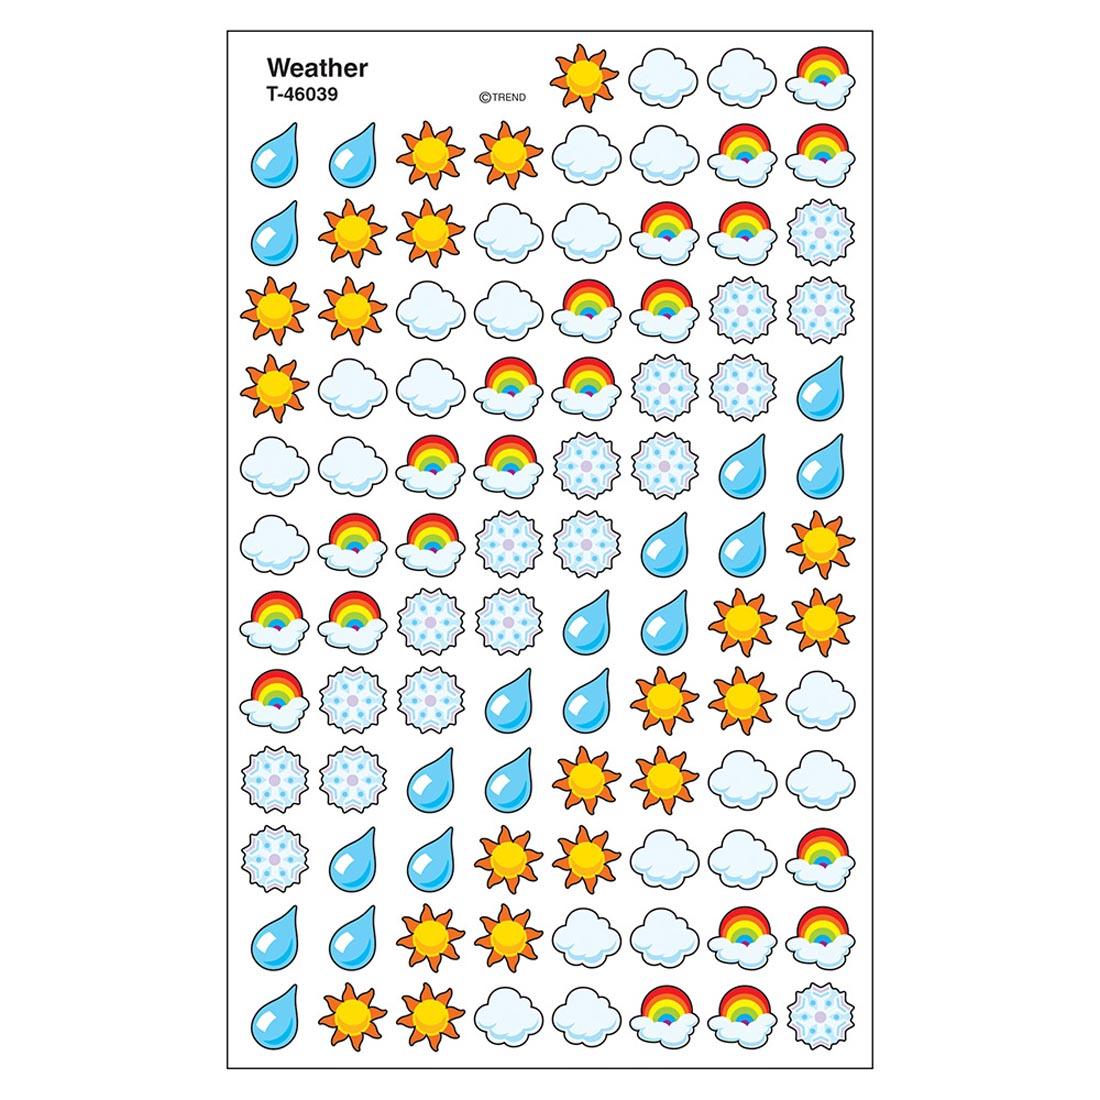 TREND Weather superShapes Stickers